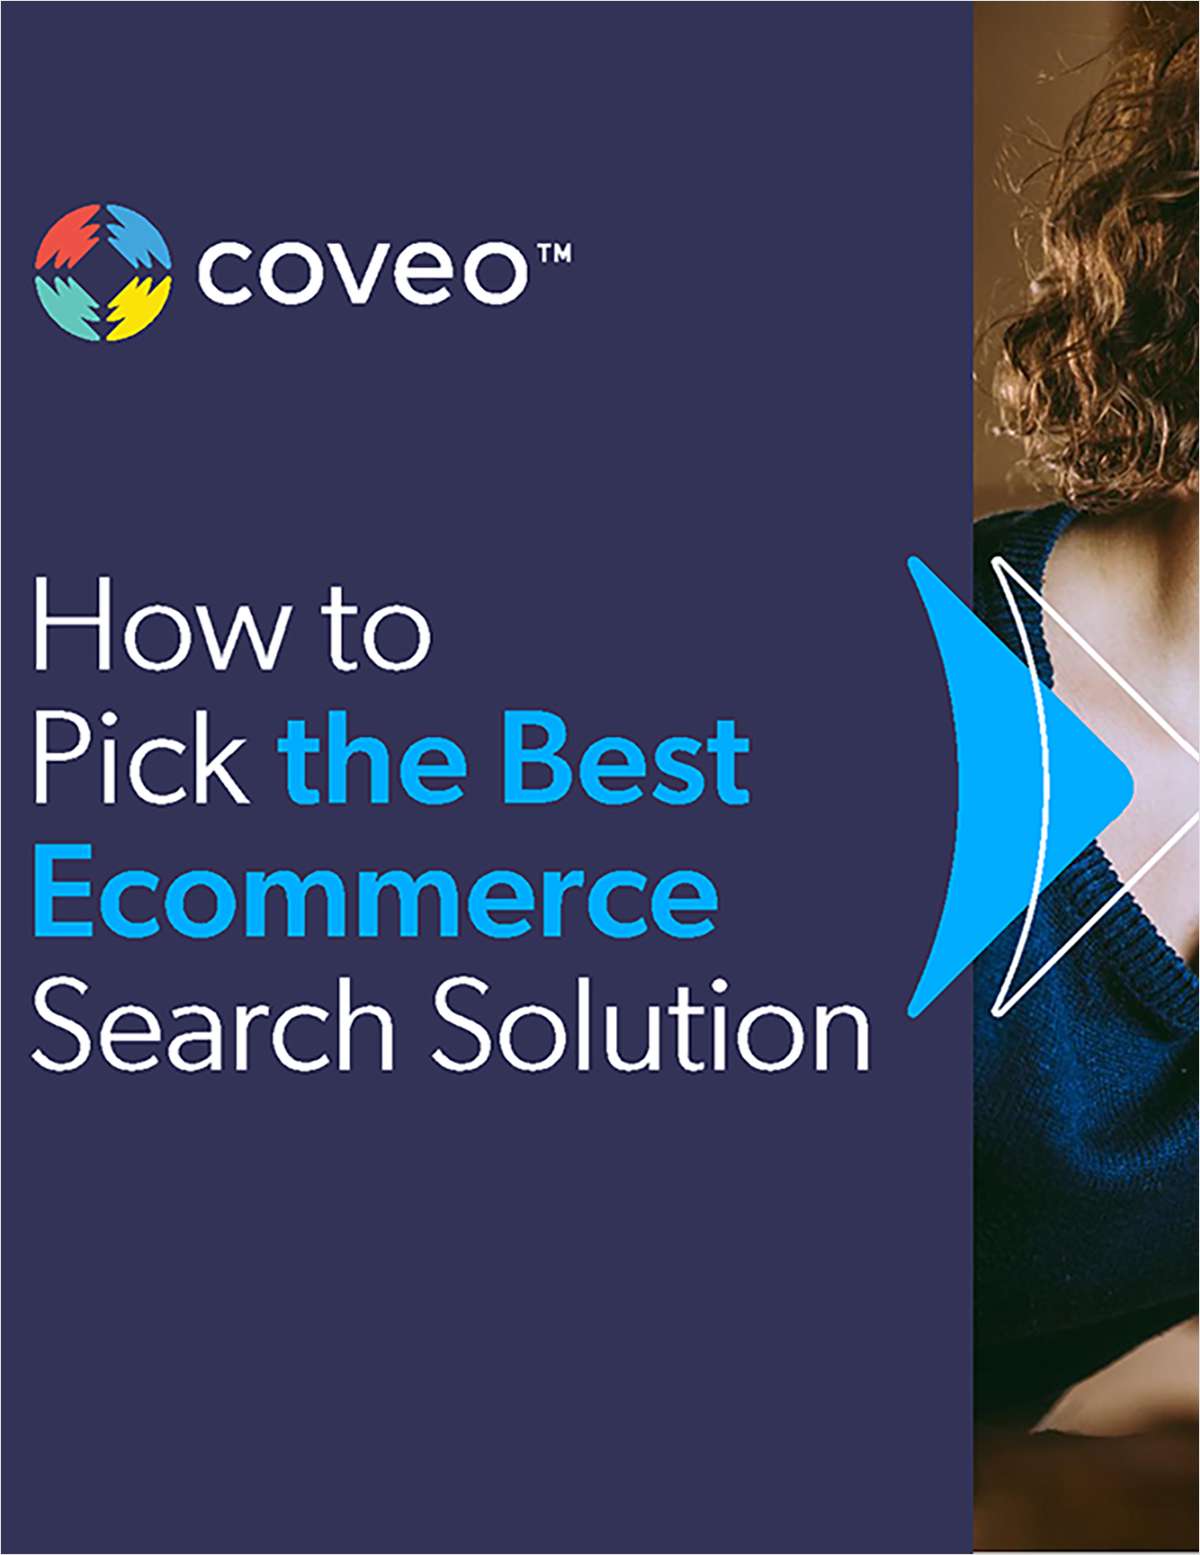 How to Pick the Best Ecommerce Search Solution